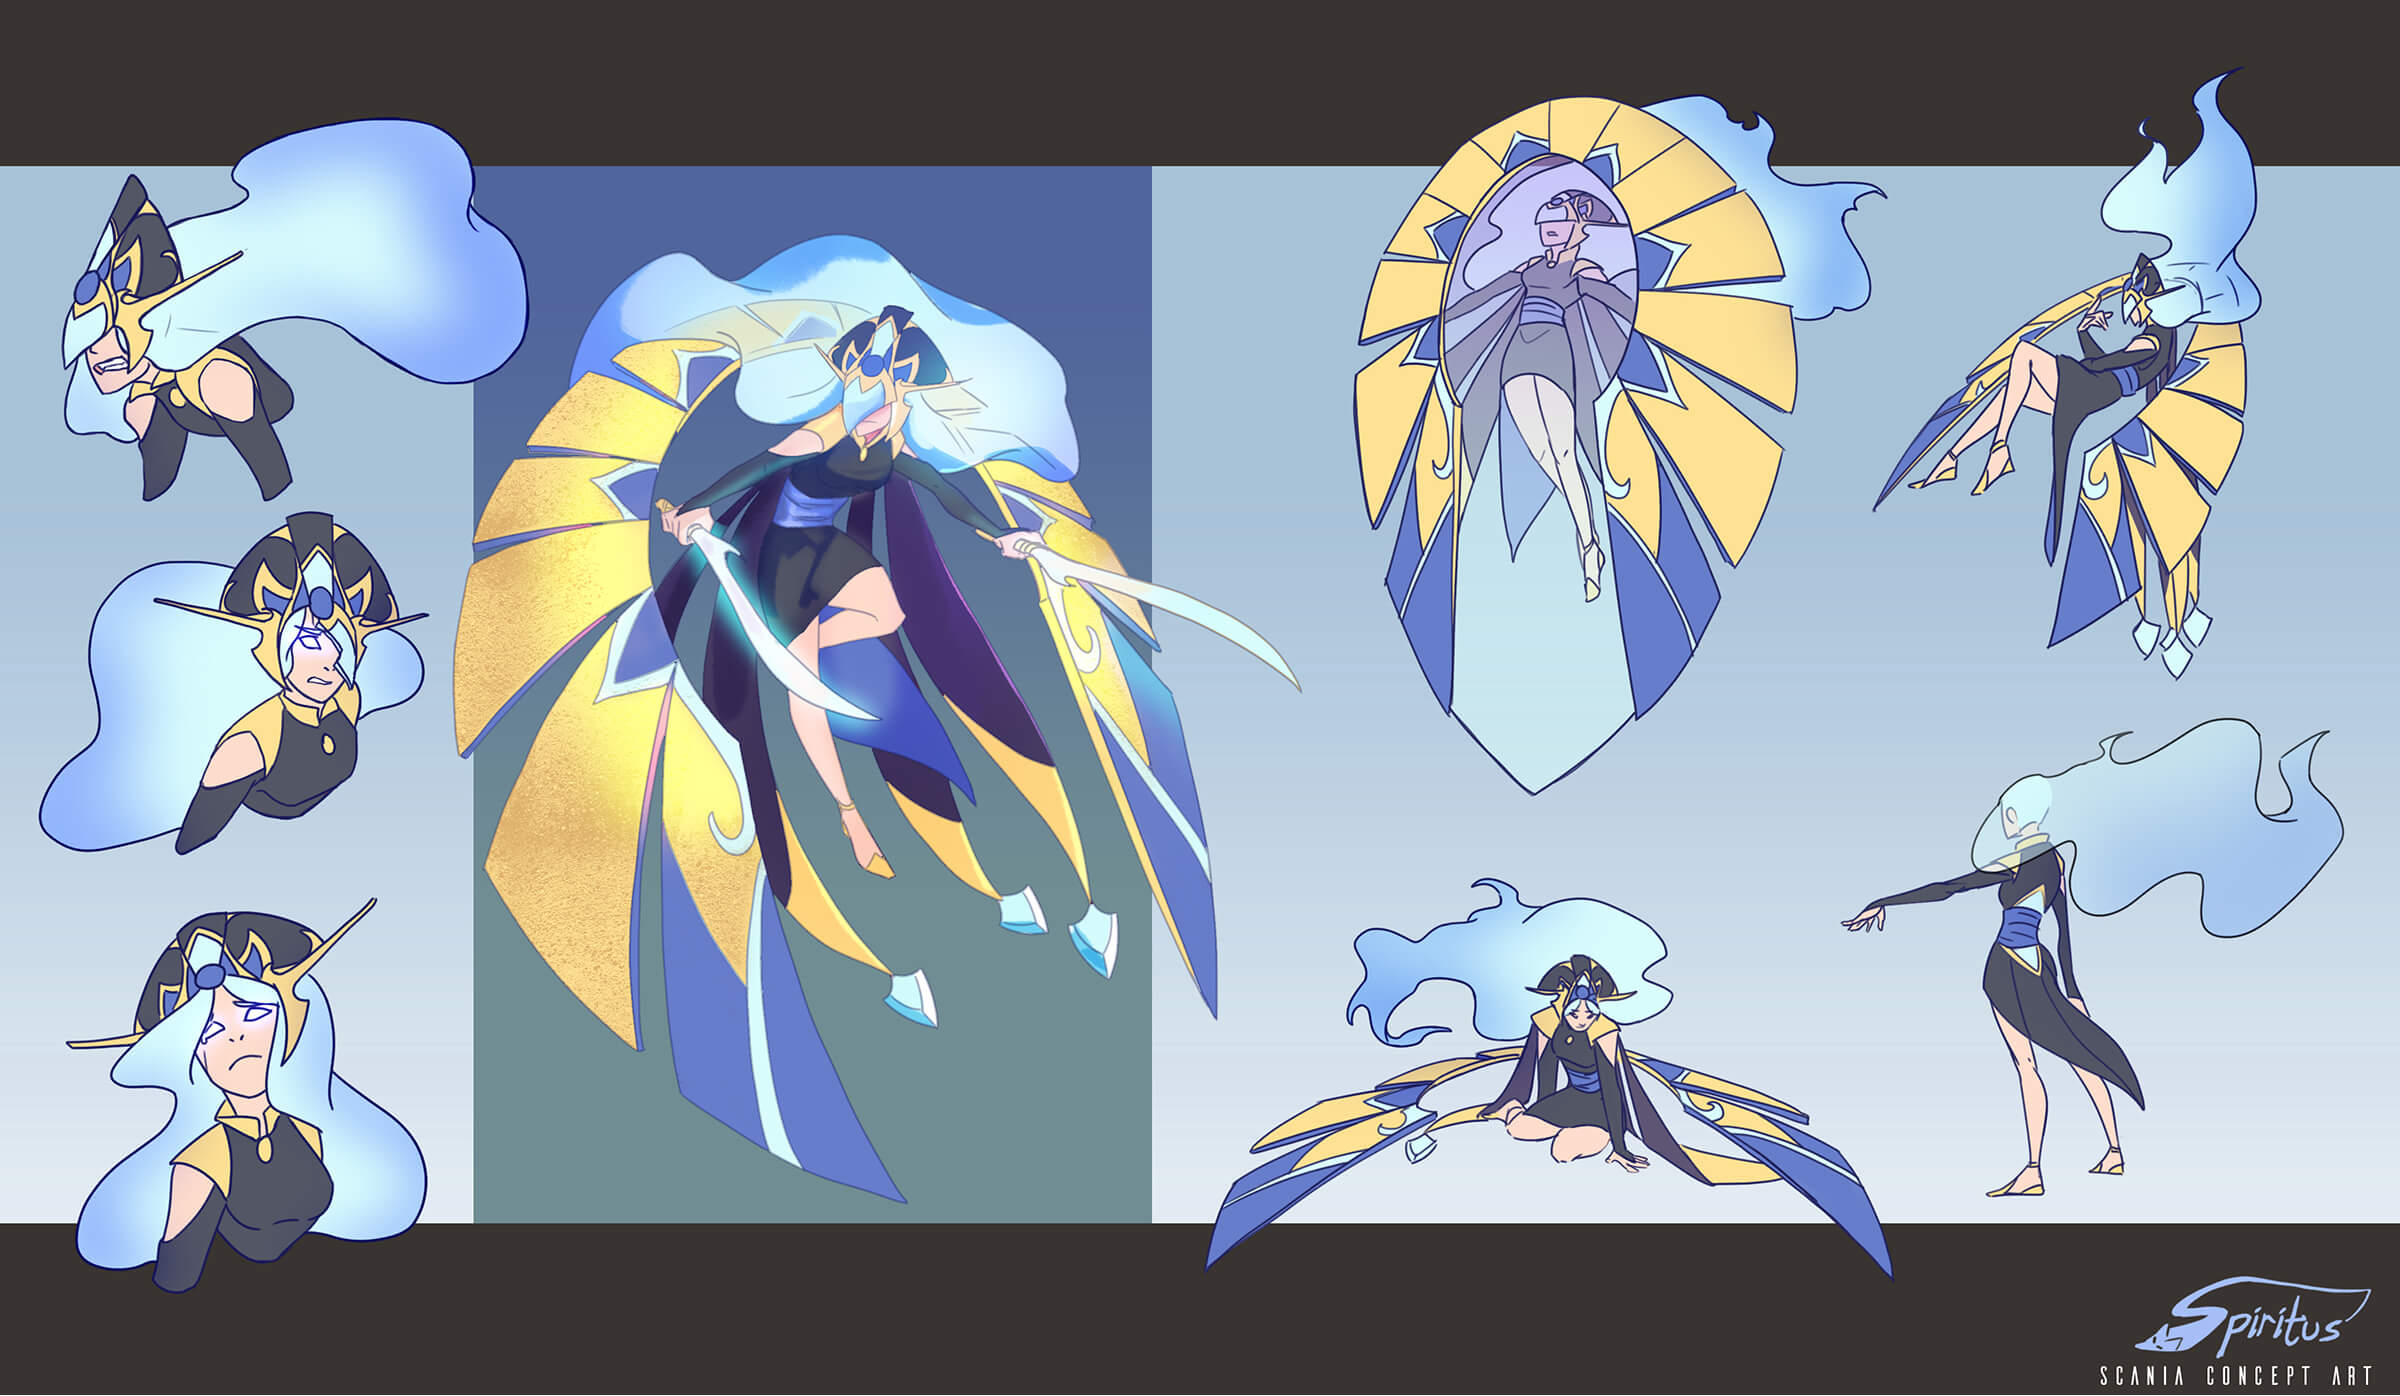 Concept art of an angelic warrior with wispy white hair, in a black tunic draped by gold and blue wings in various poses.